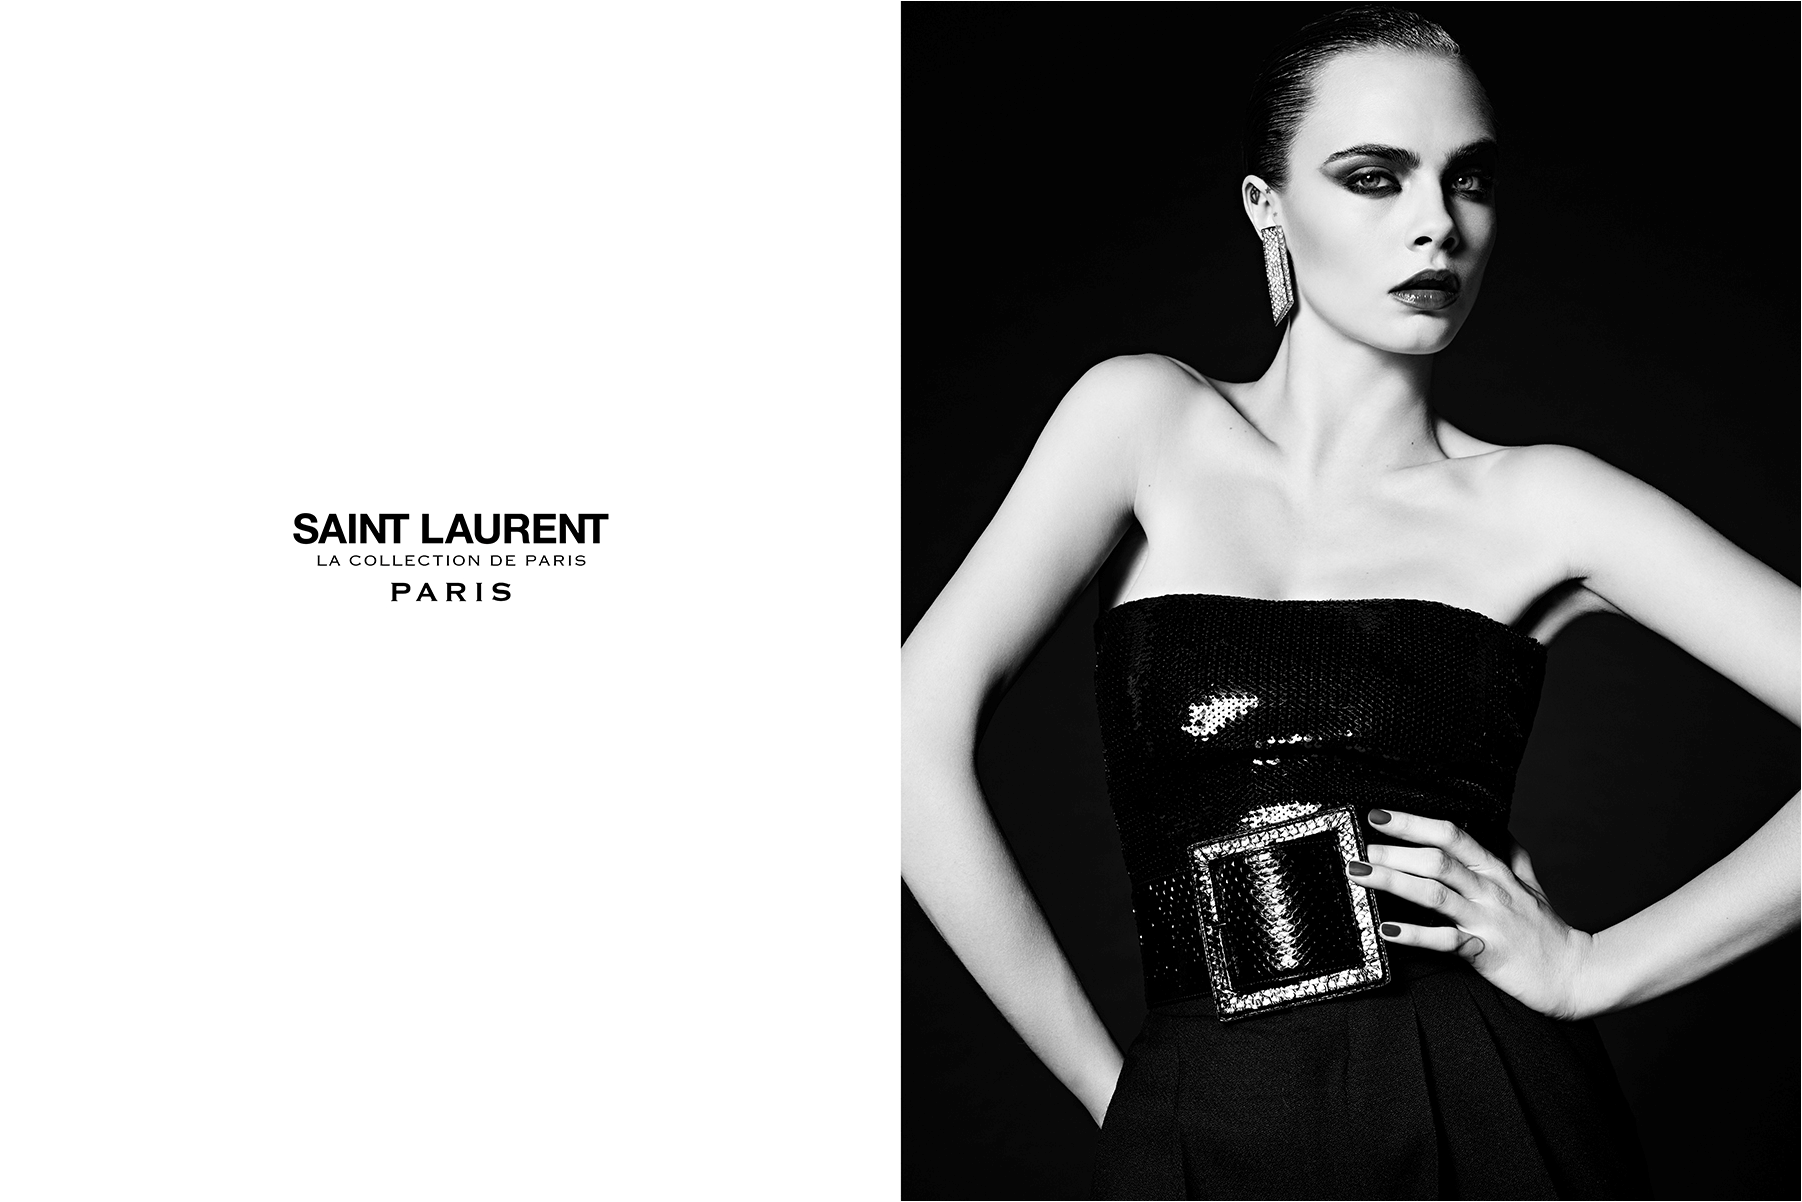 cara delevingne stars in the new saint laurent campaign | watch | i-D